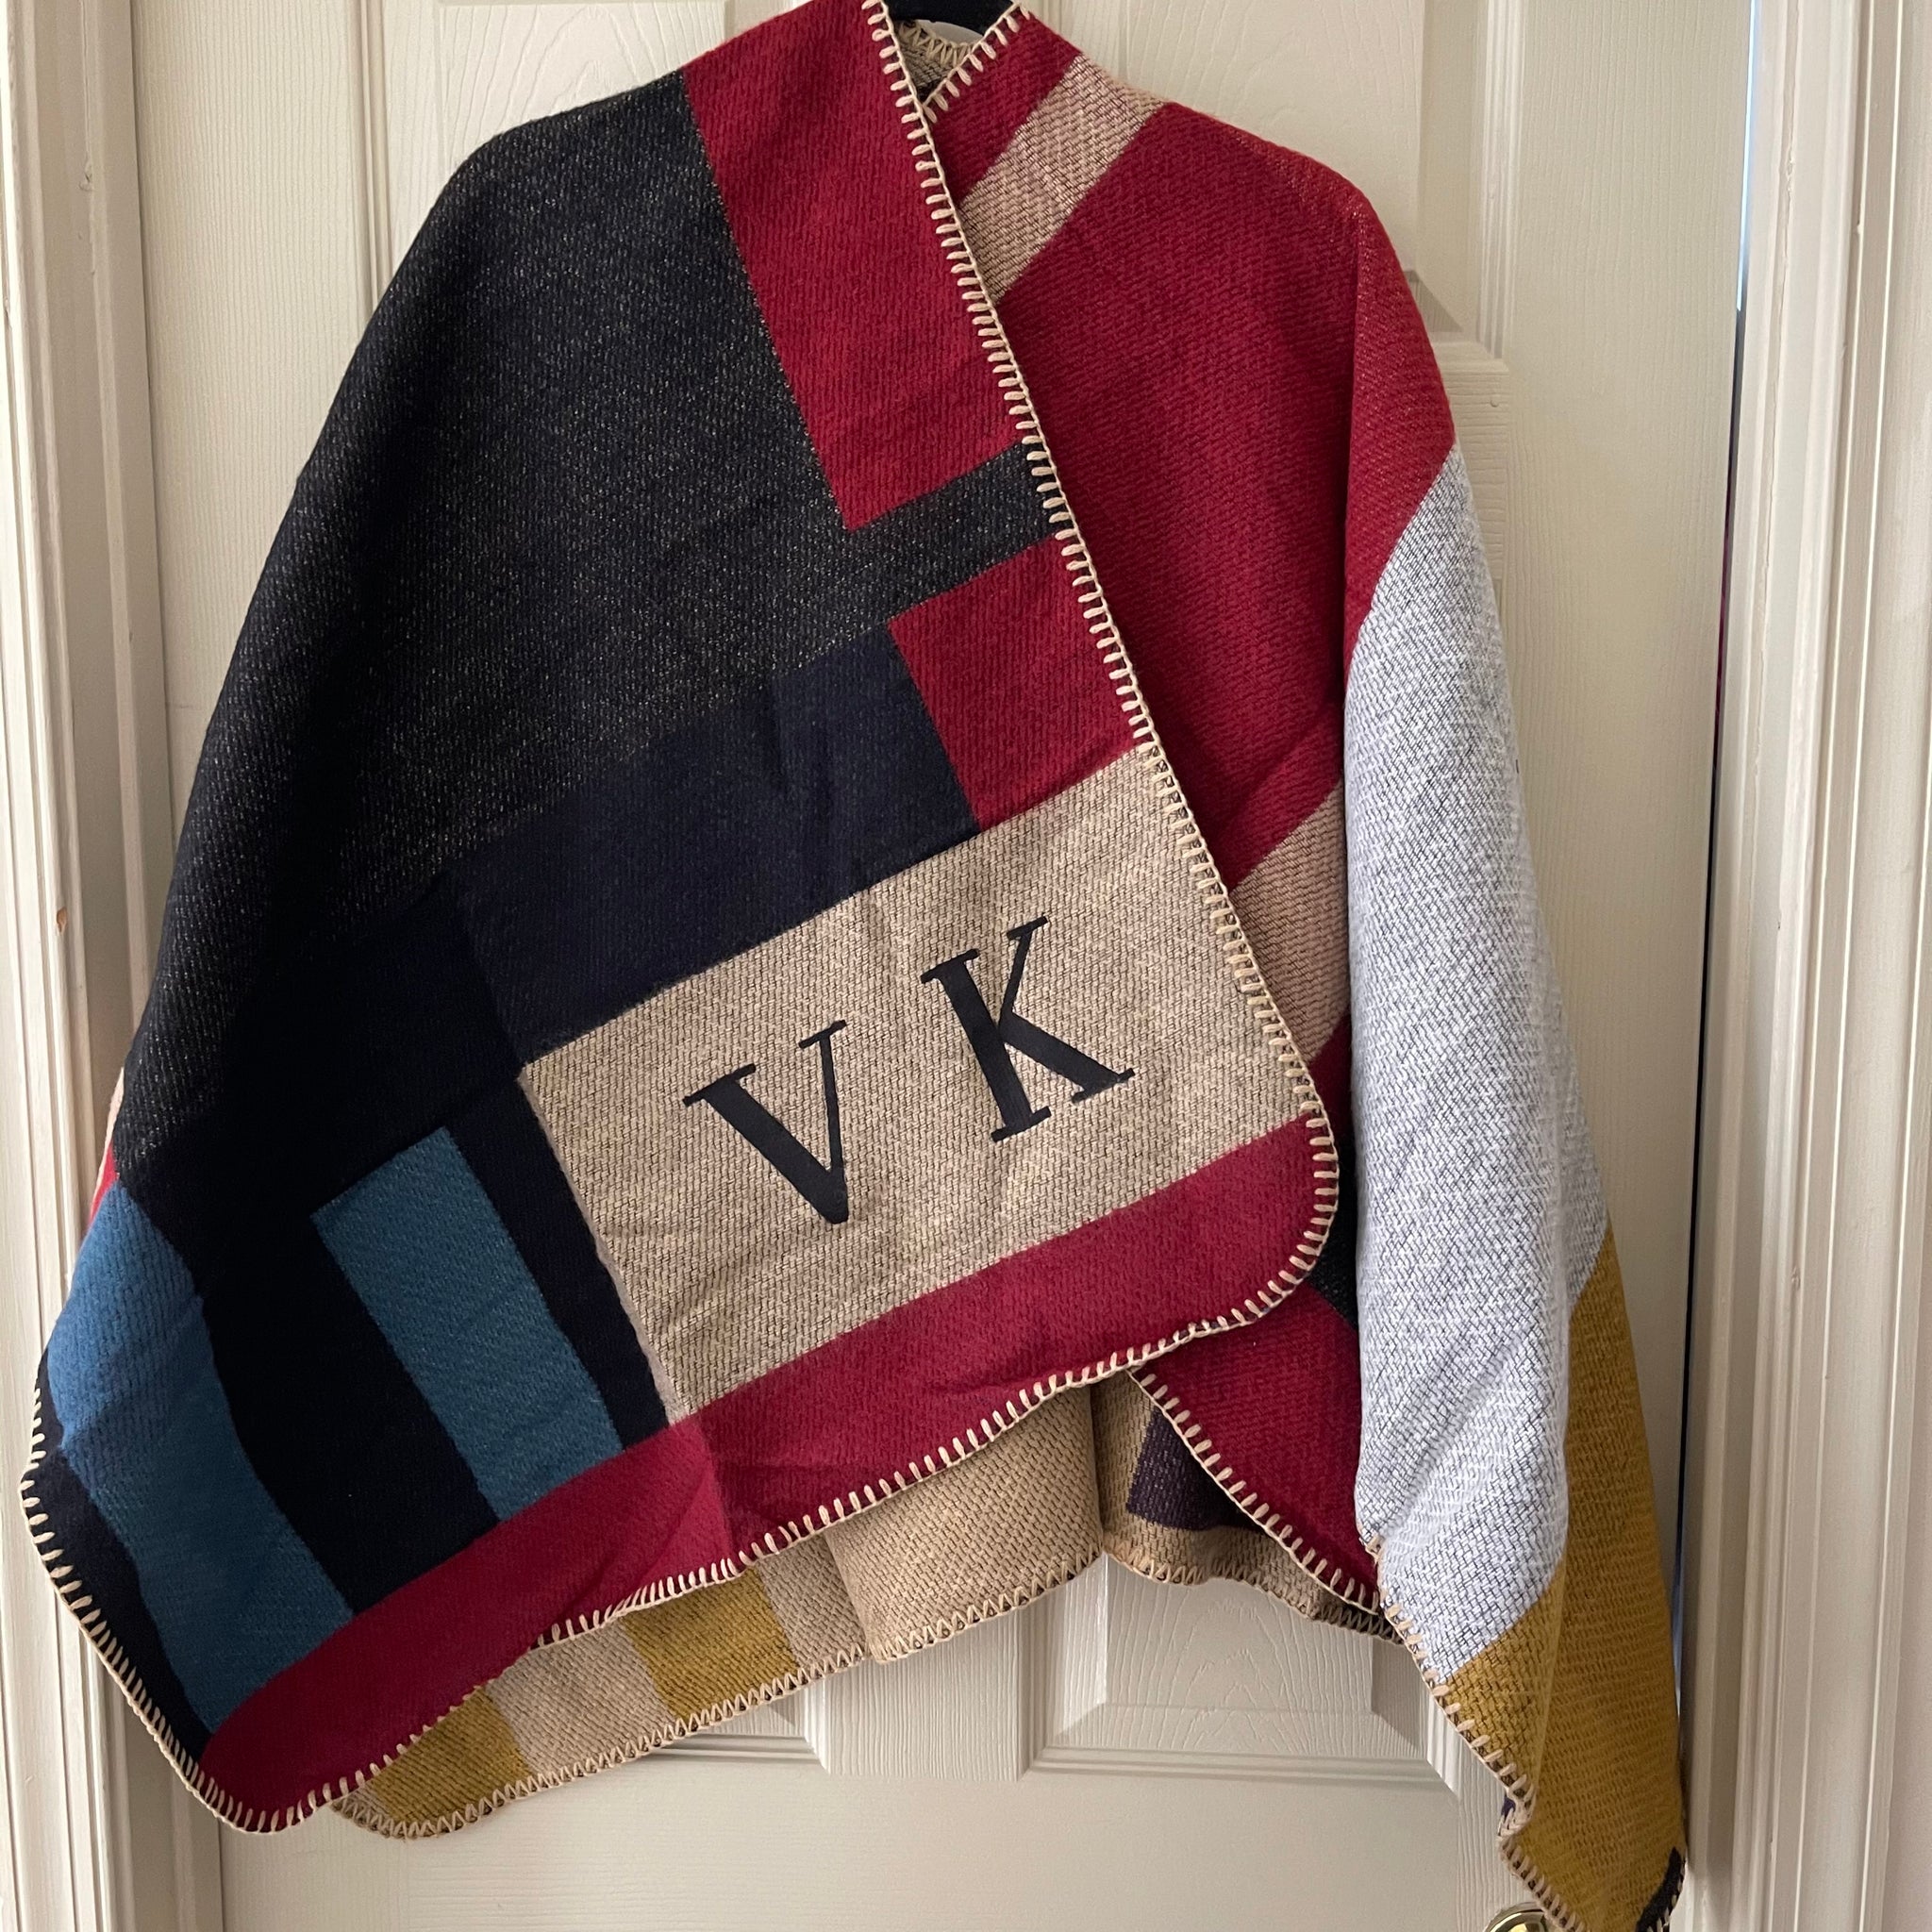 MADE FOR ME - Plaid Monogram Poncho in multicolor - VK